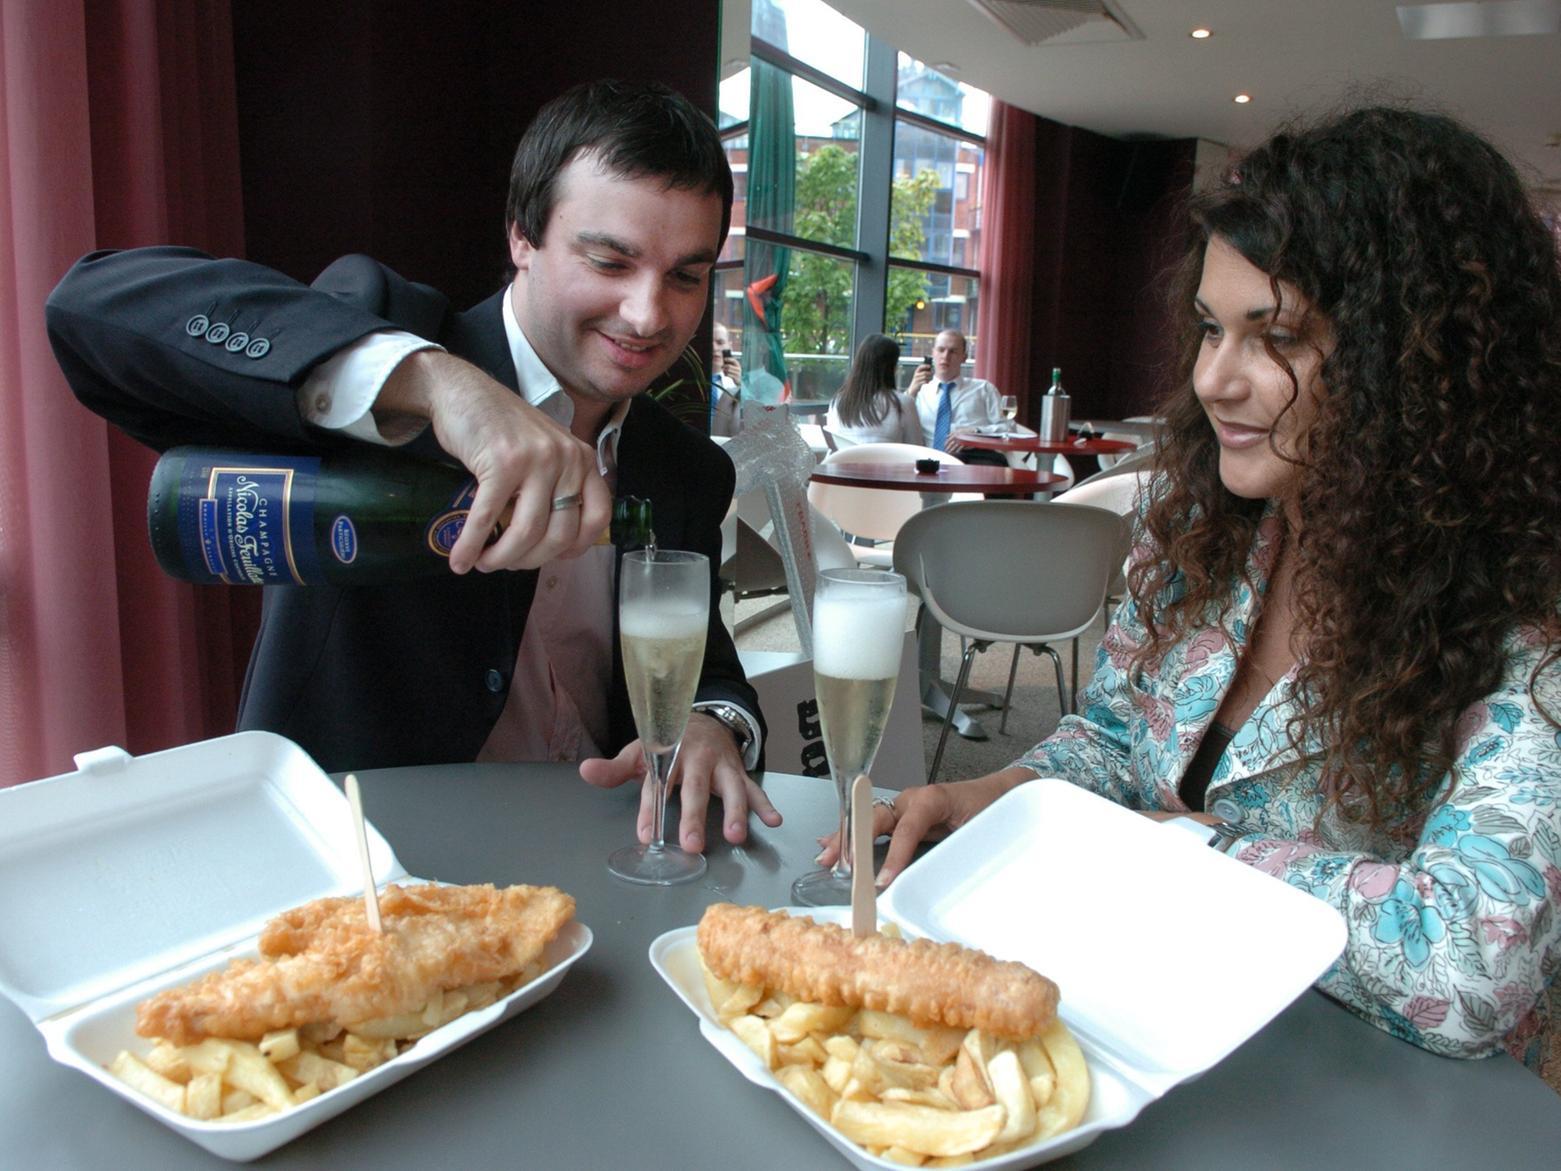 Oracle launched its fish and chips with champagne concept in August 2006.